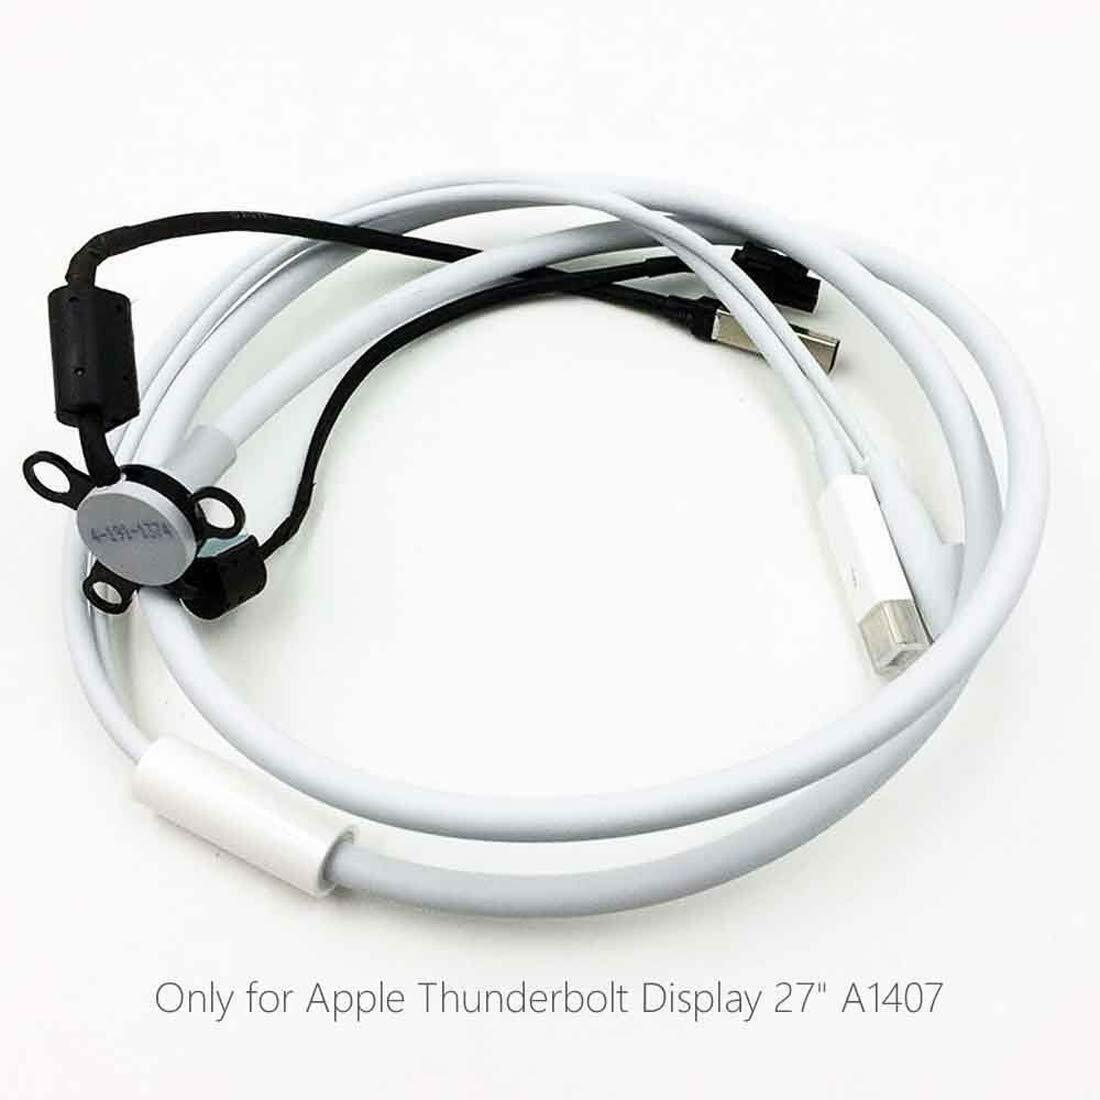 ALL IN ONE CABLE for Apple Thunderbolt Display 27” A1407 Mid 2011 MC914 922-9941